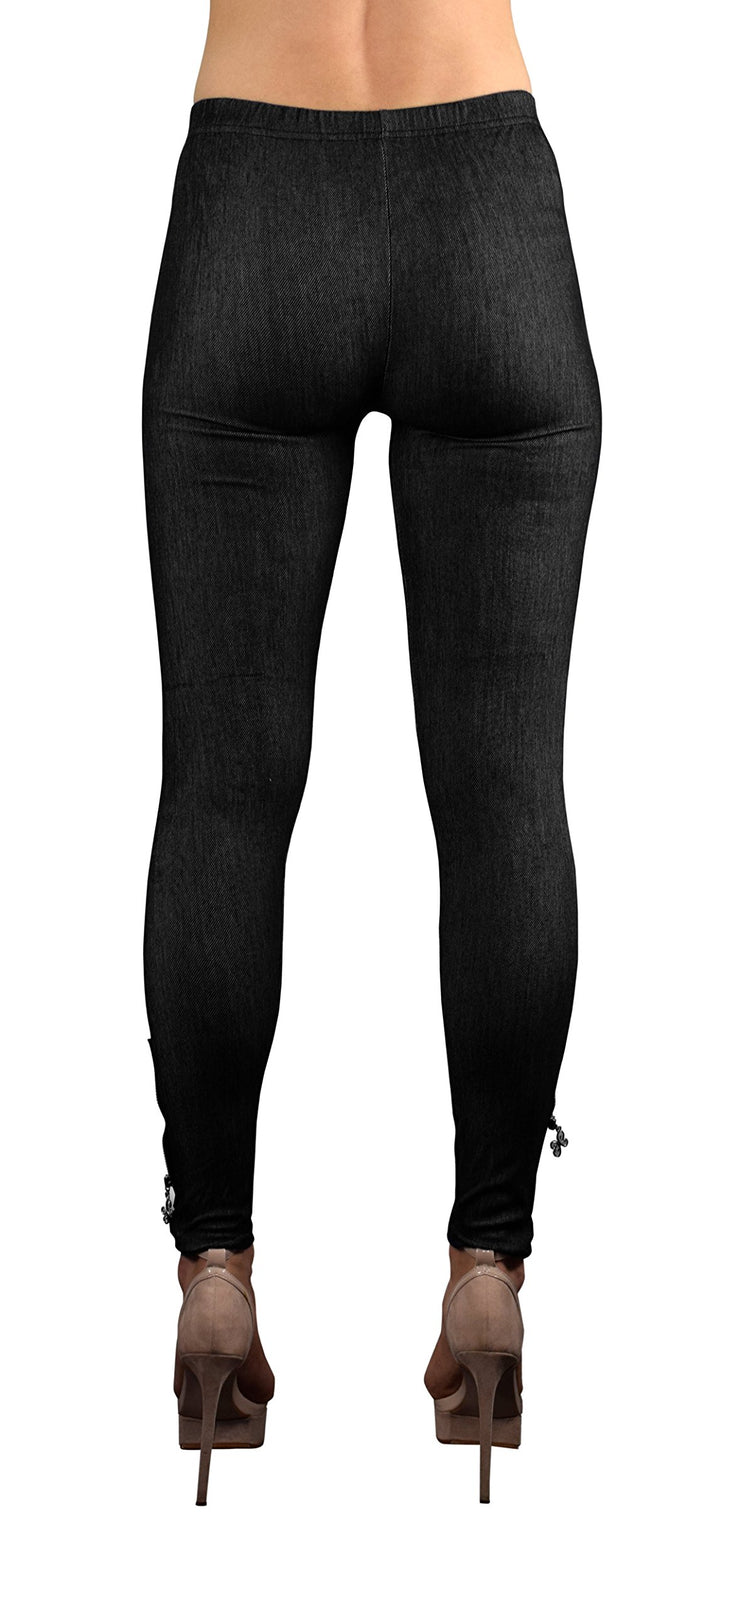 Peach Couture Womens Full Length Ankle Zip Stretchable Jeggings Leggings